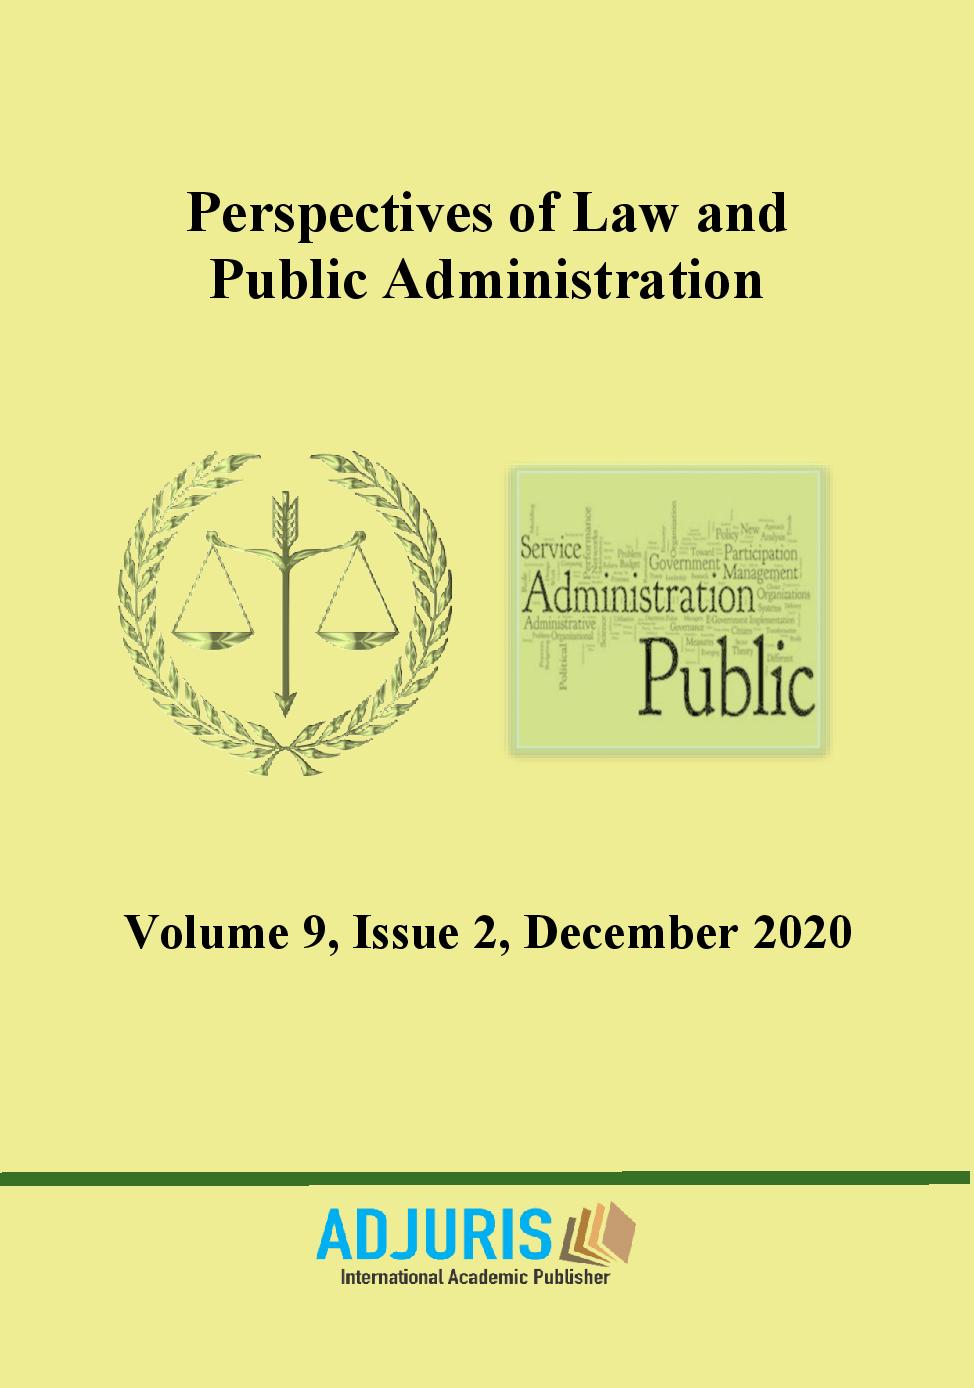 FOREIGN ARBITRAL AWARD UNDER THE CODE OF CIVIL PROCEDURE AND THE CONVENTION ON THE RECOGNITION AND ENFORCEMENT OF FOREIGN ARBITRAL AWARDS, ADOPTED IN NEW YORK (1958). COMPARATIVE LOOK Cover Image